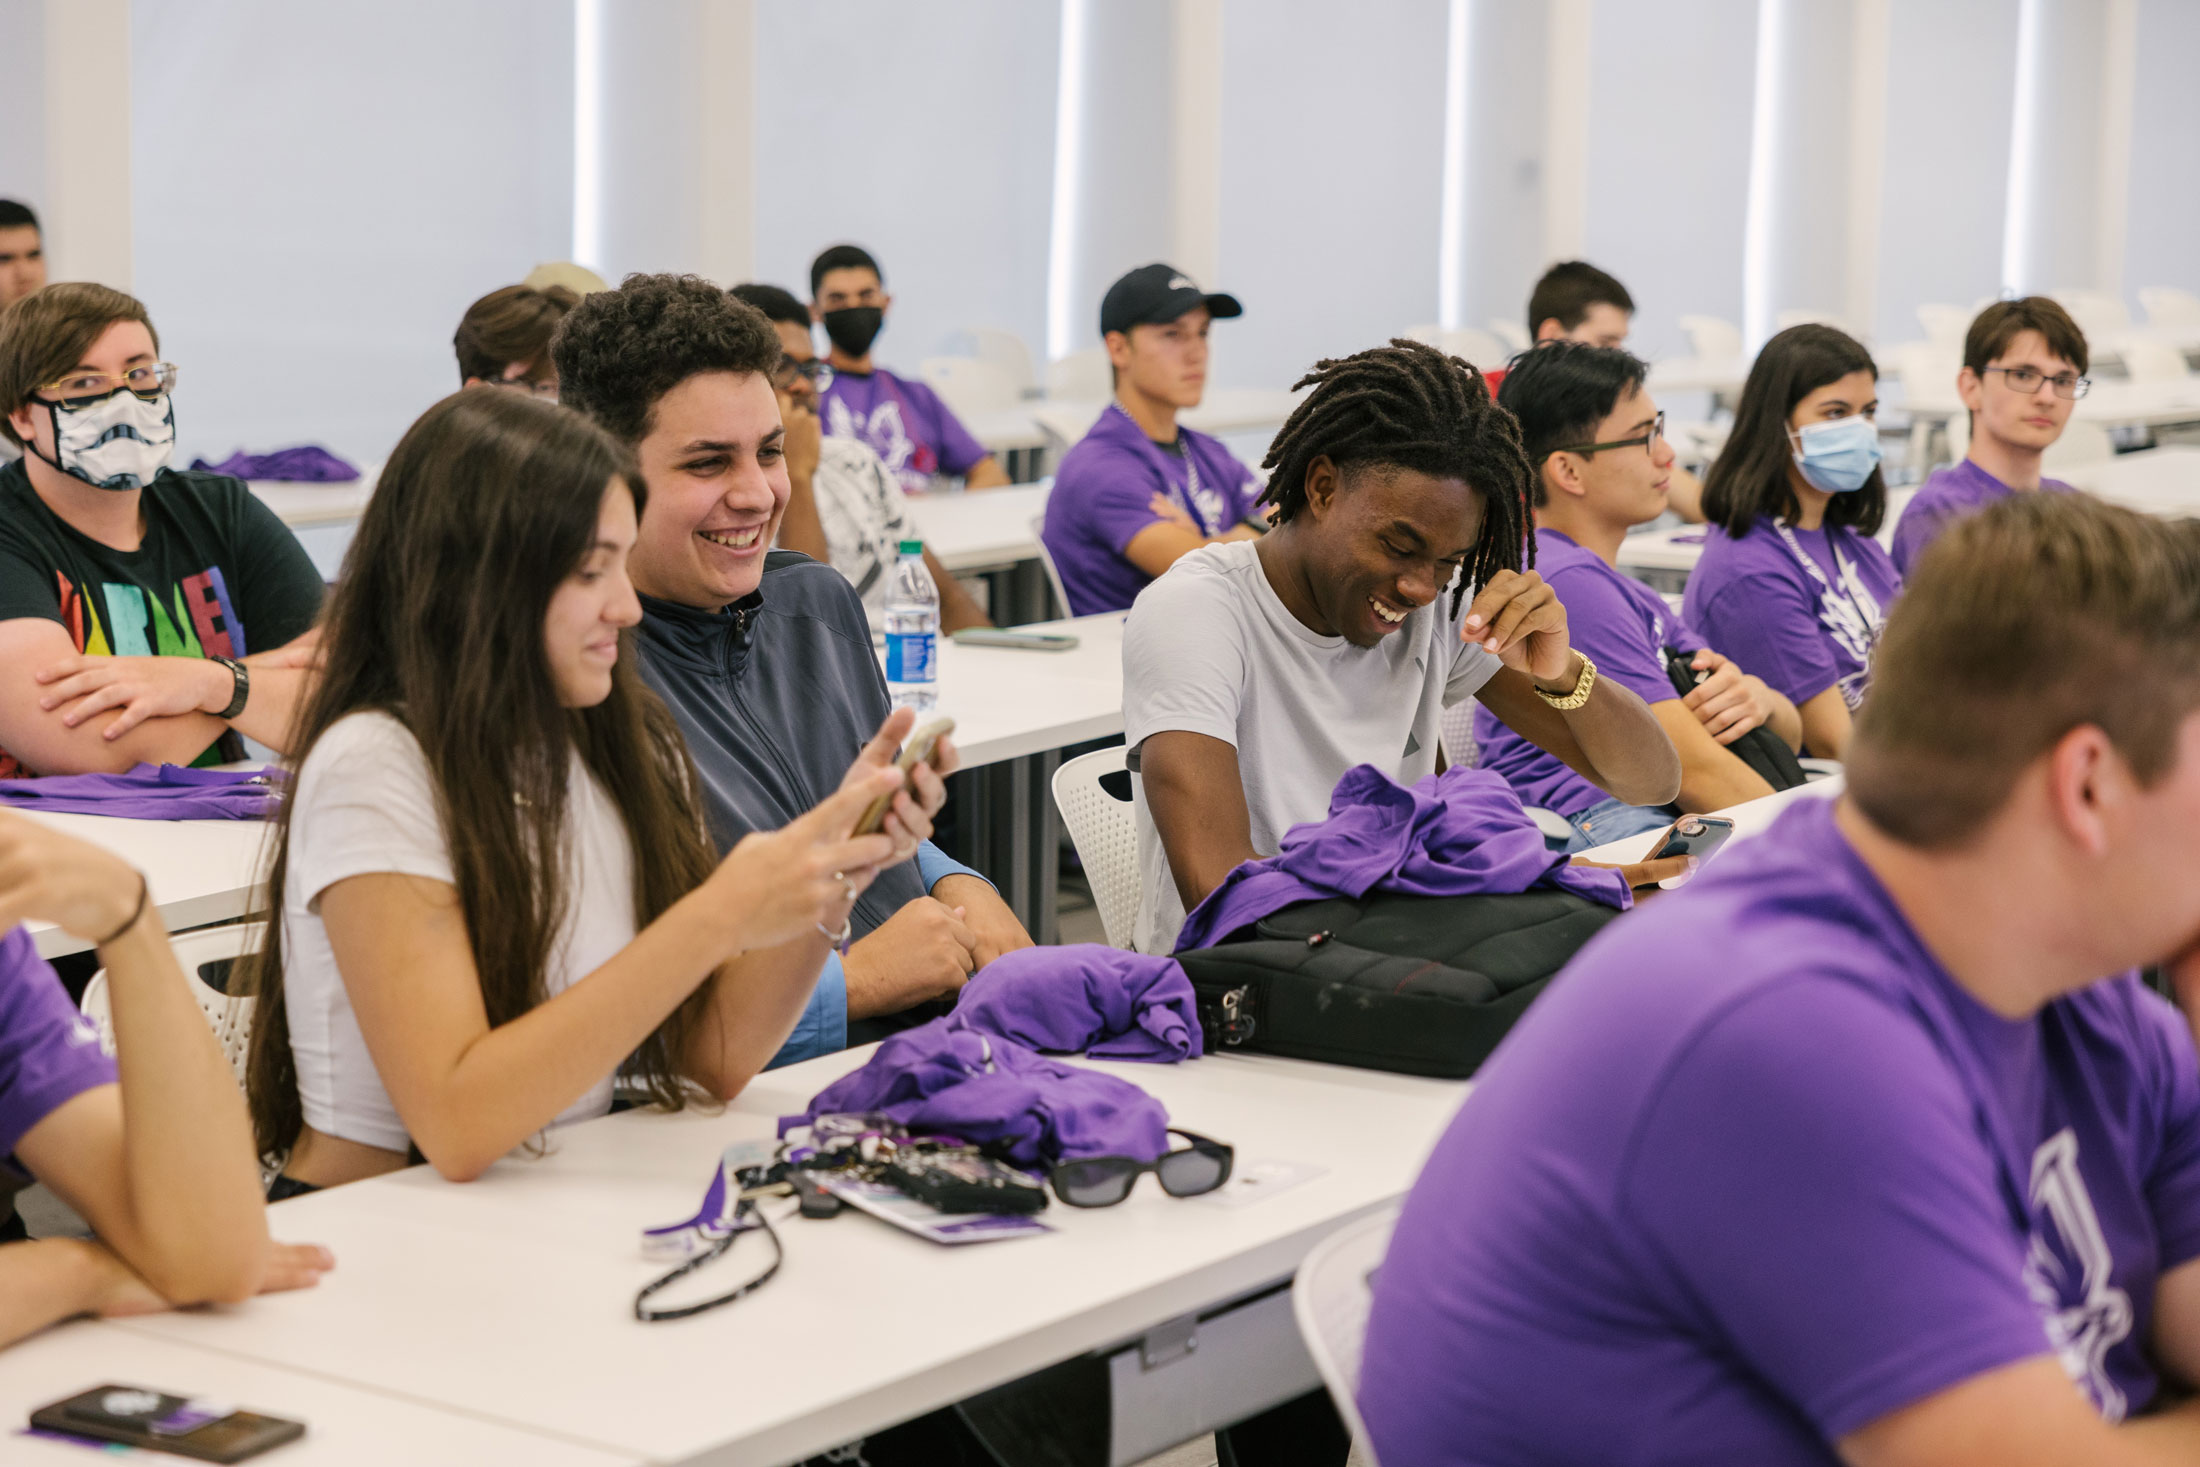 Florida Polytechnic University students laugh in a classroom.